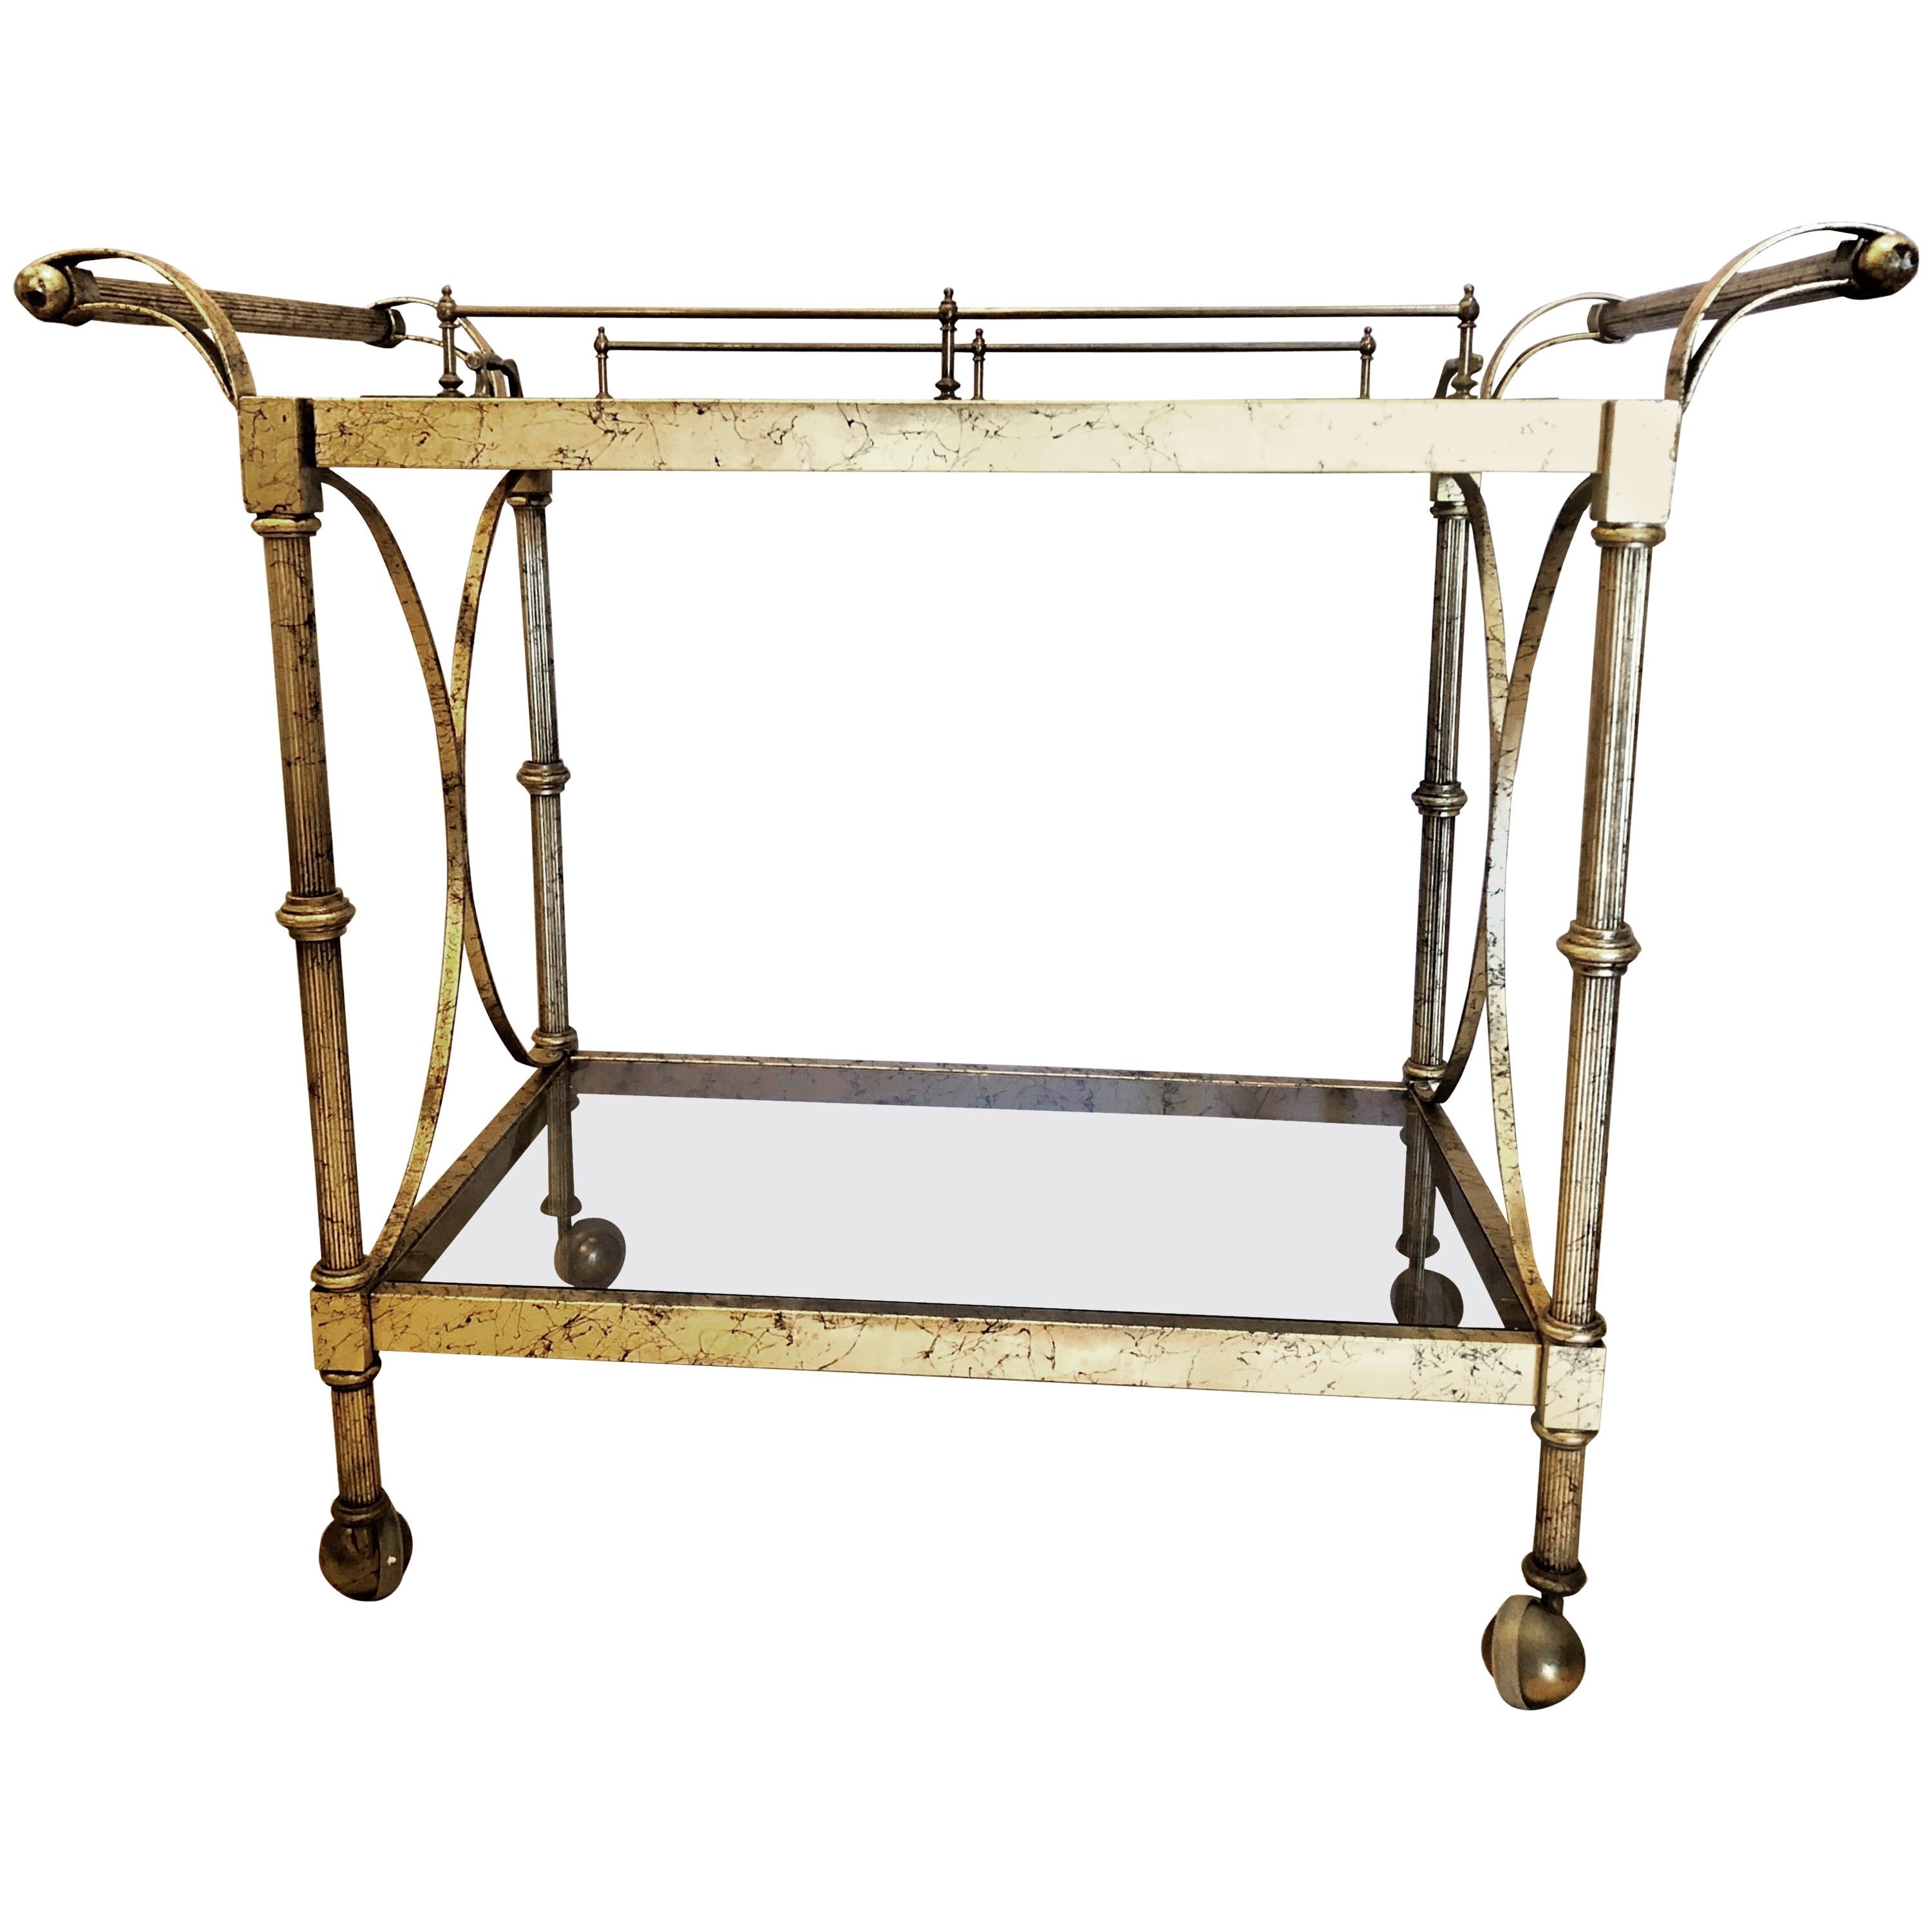 Hollywood Regency Two-Tier Serving Cart in a Faux Marbleized Design